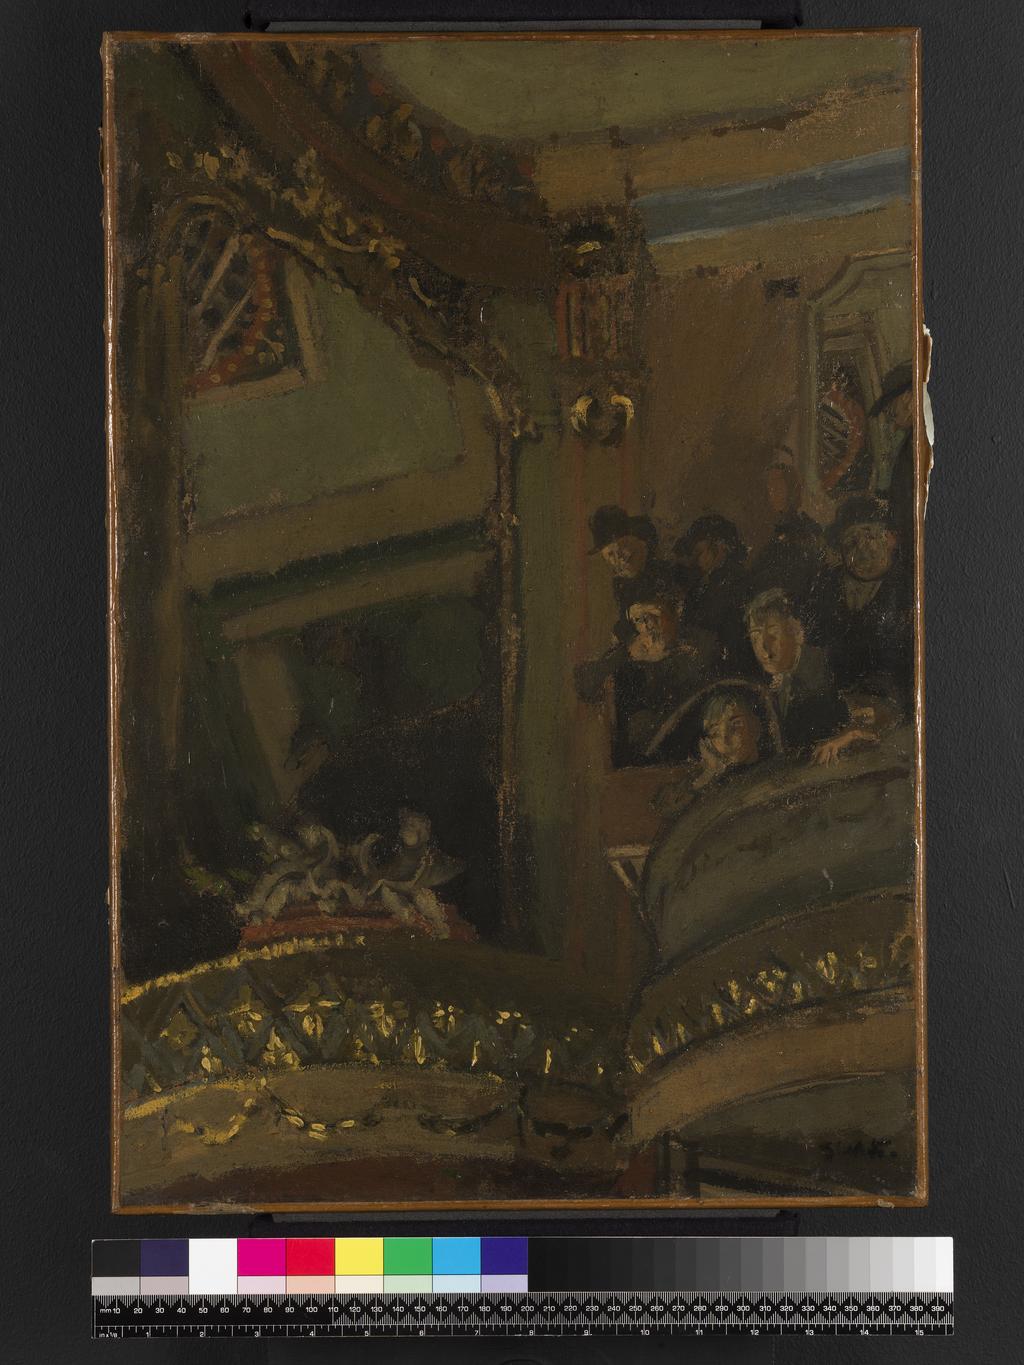 An image of The Old Bedford Music Hall. Sickert, Walter Richard. Oil on canvas, height 54.9 cm, width 38.1 cm, 1894-1895.